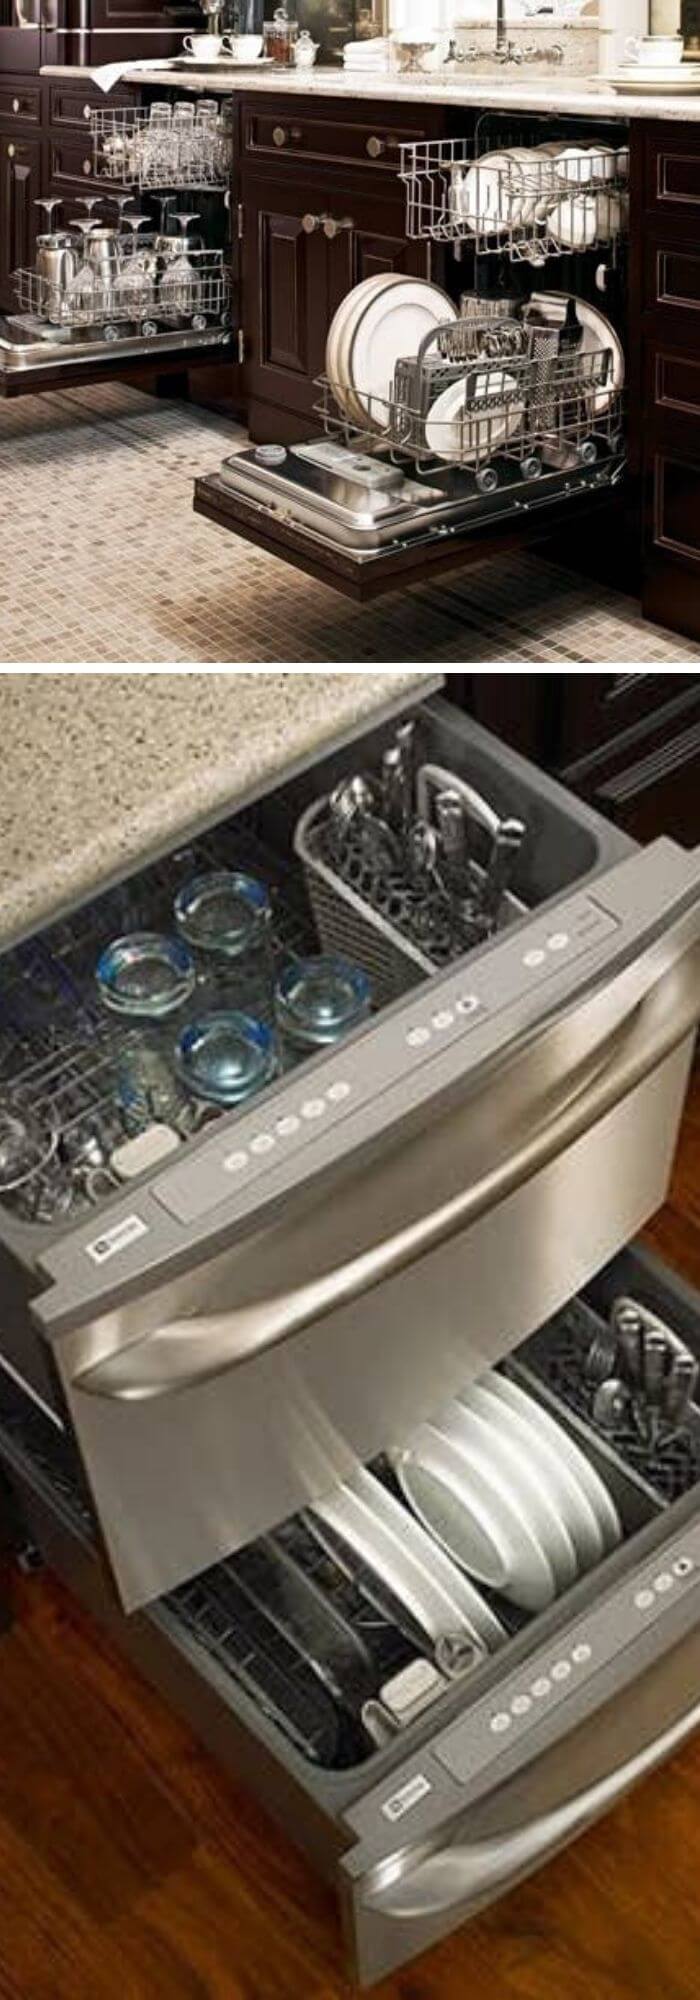 Make space for two dishwashers except for one